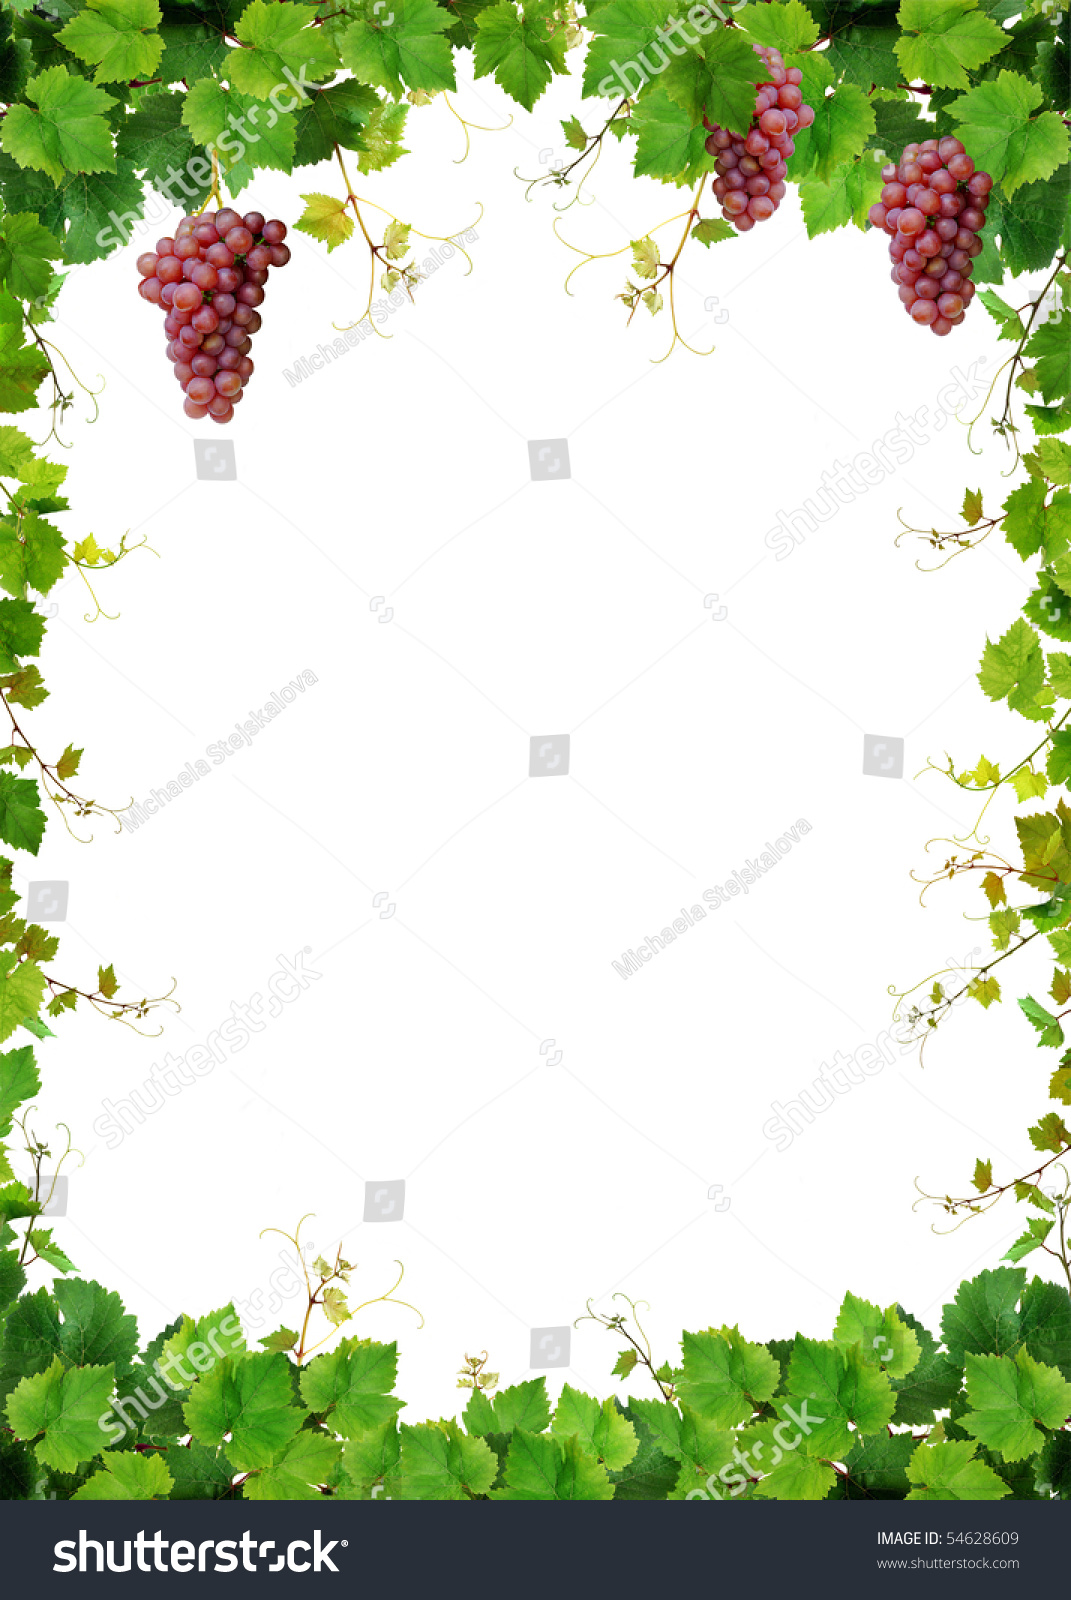 Fresh Grapevine Frame Pink Grapes Isolated Stock Photo 54628609 ...